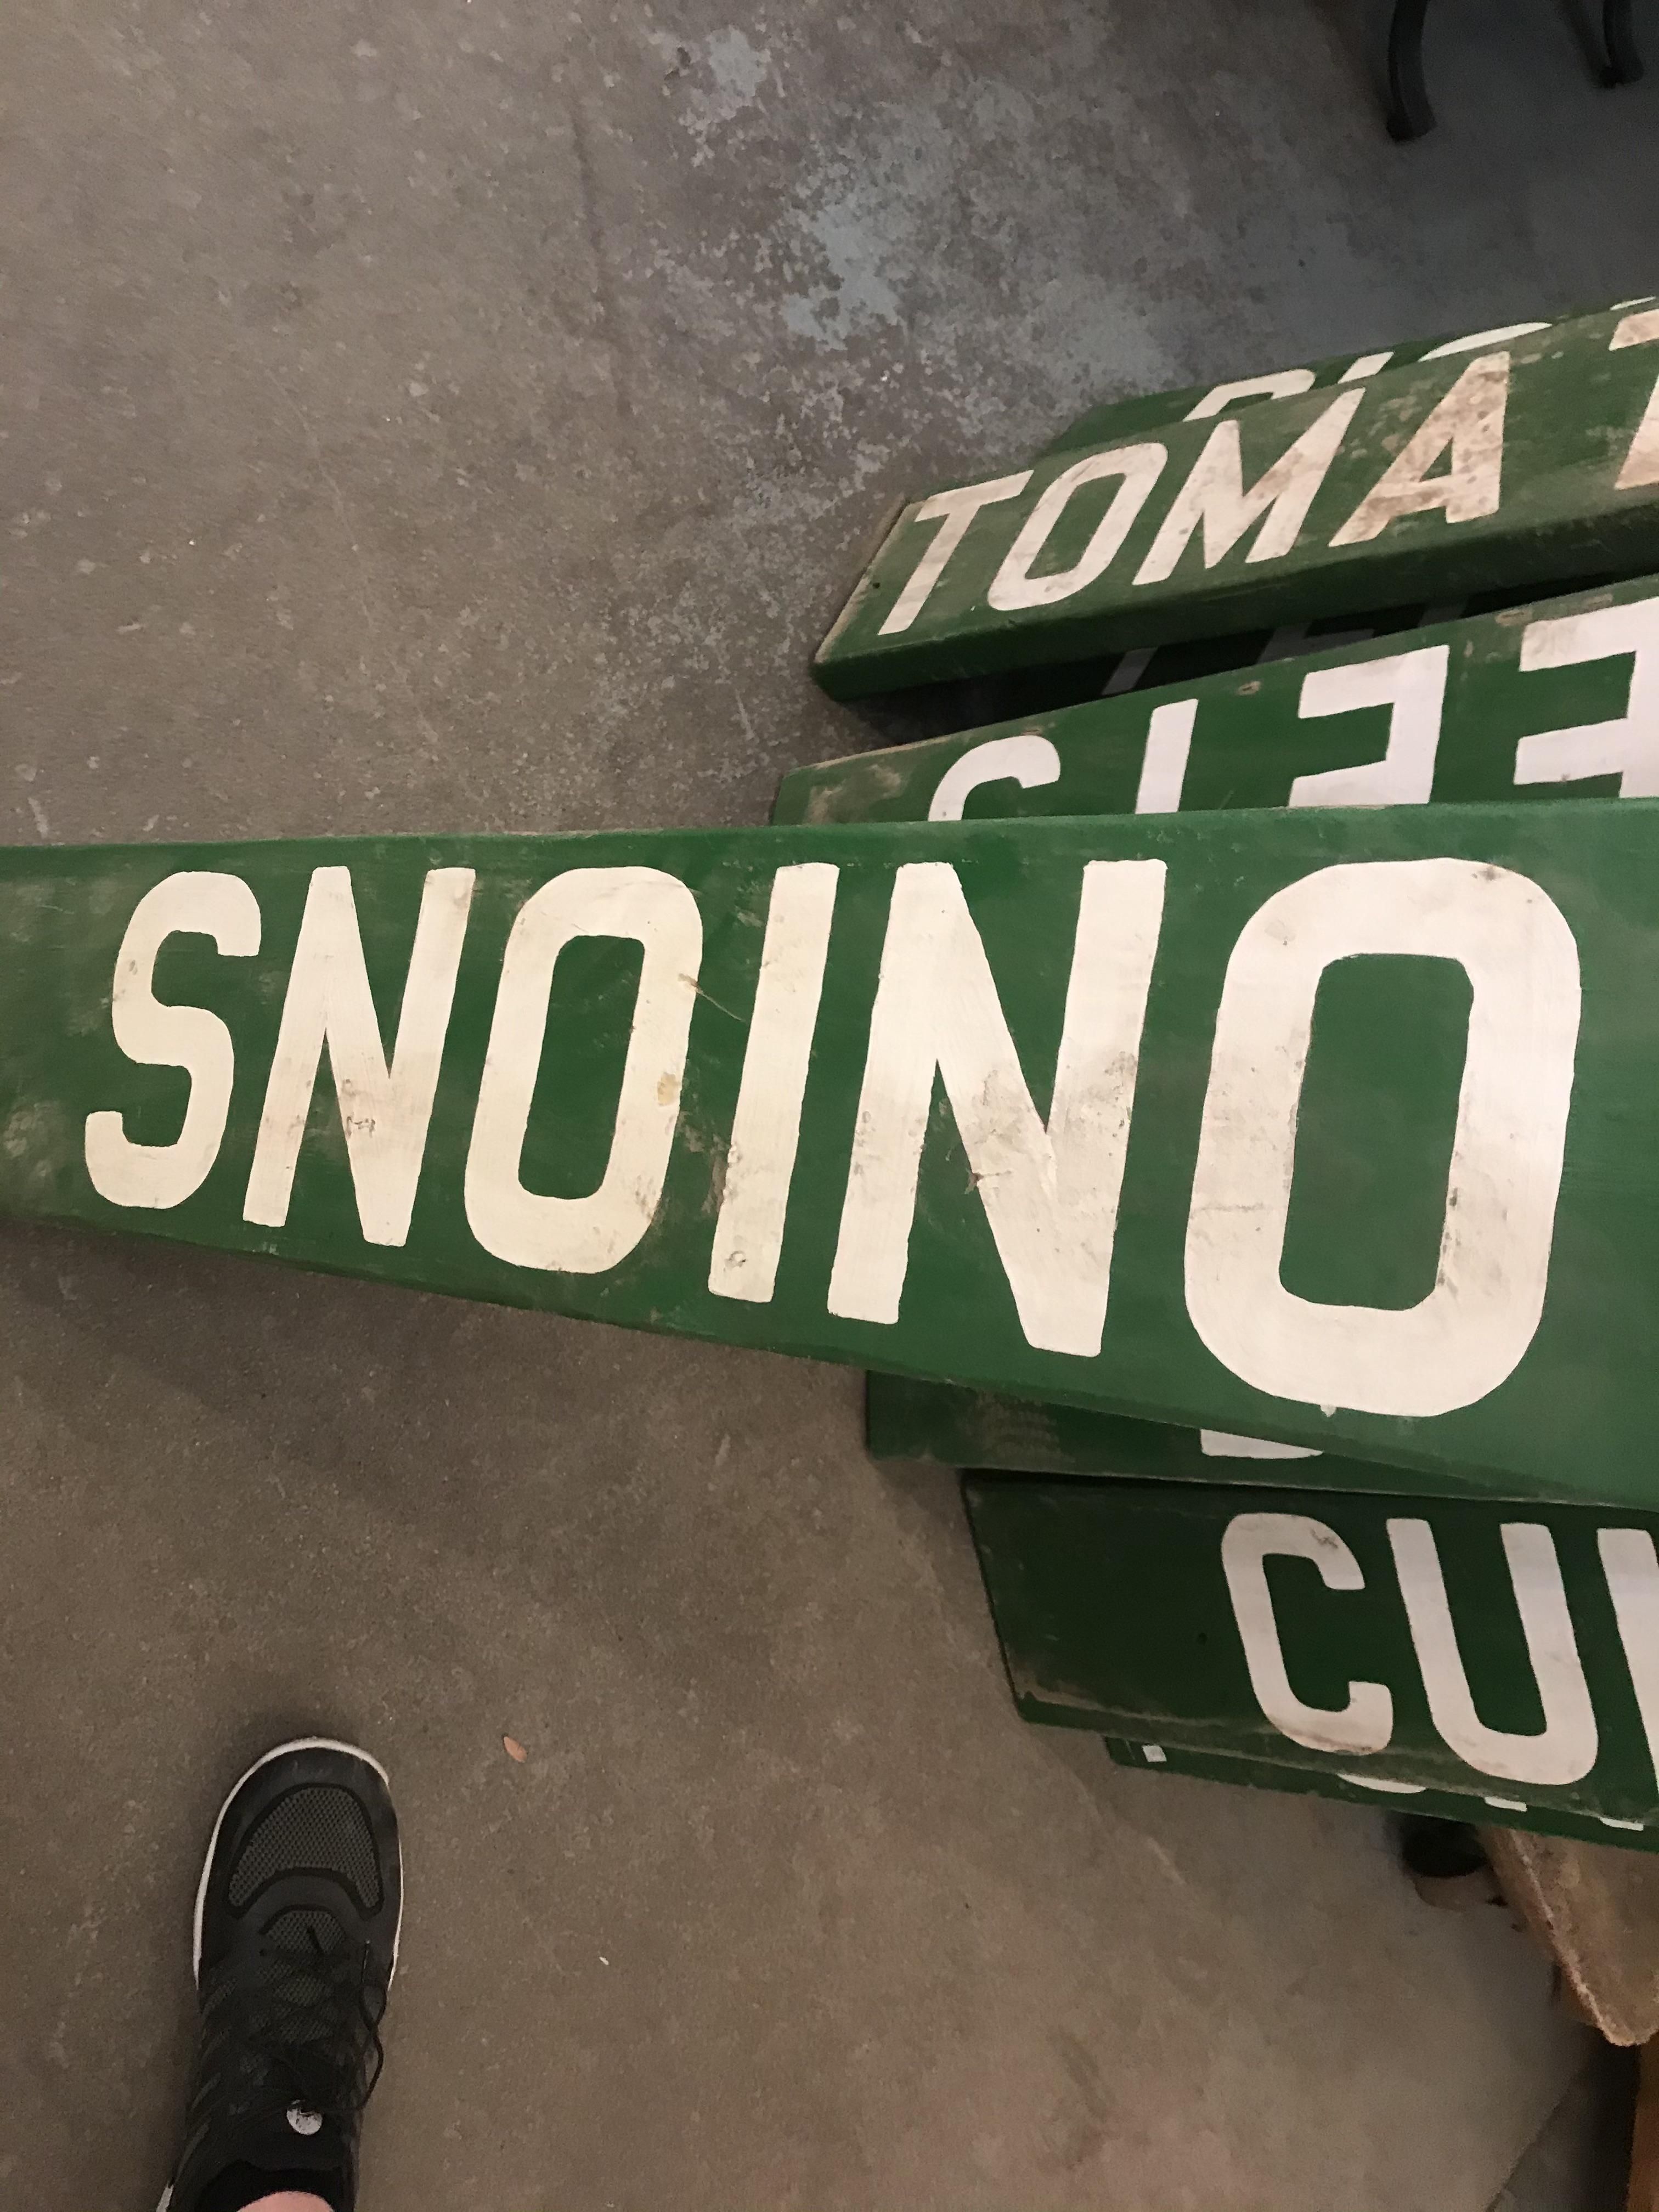 Got some old produce signs in at work. Didn’t sleep last night, and took way to long to figure out what “snoino” meant.